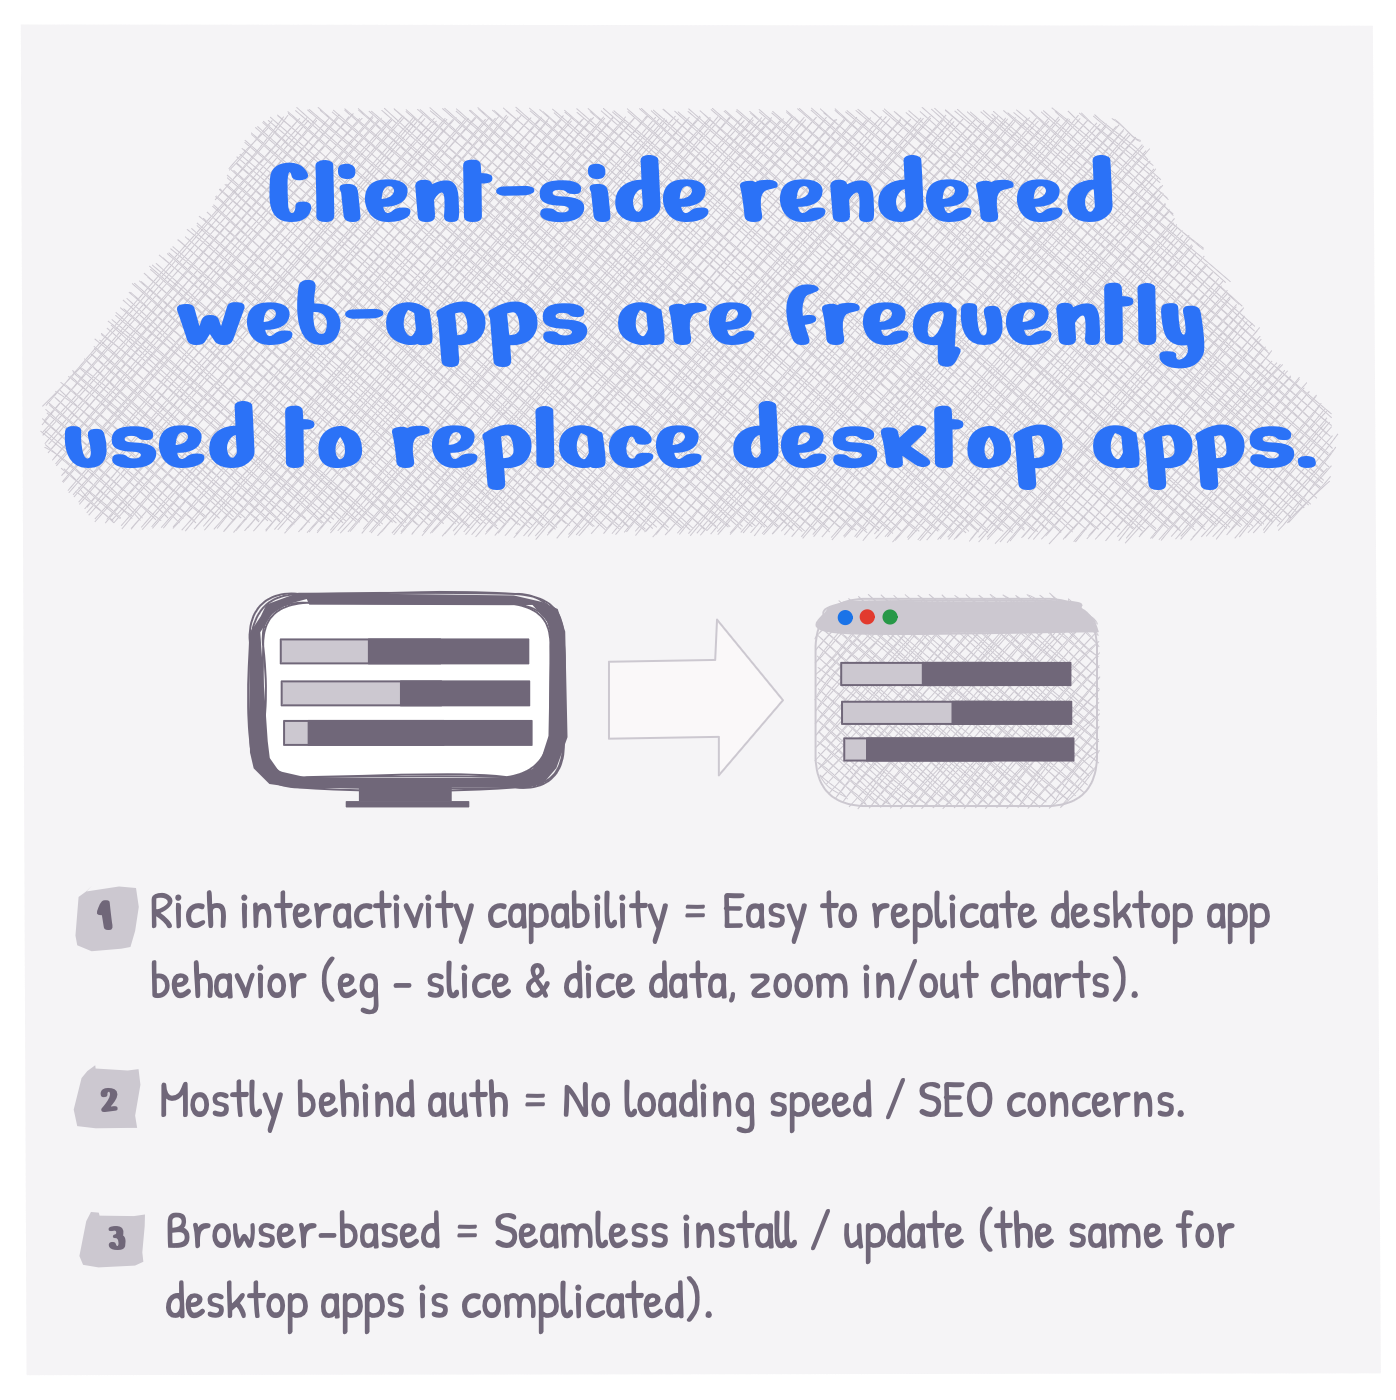 Client-side rendered web-apps are frequently used to replace desktop apps.